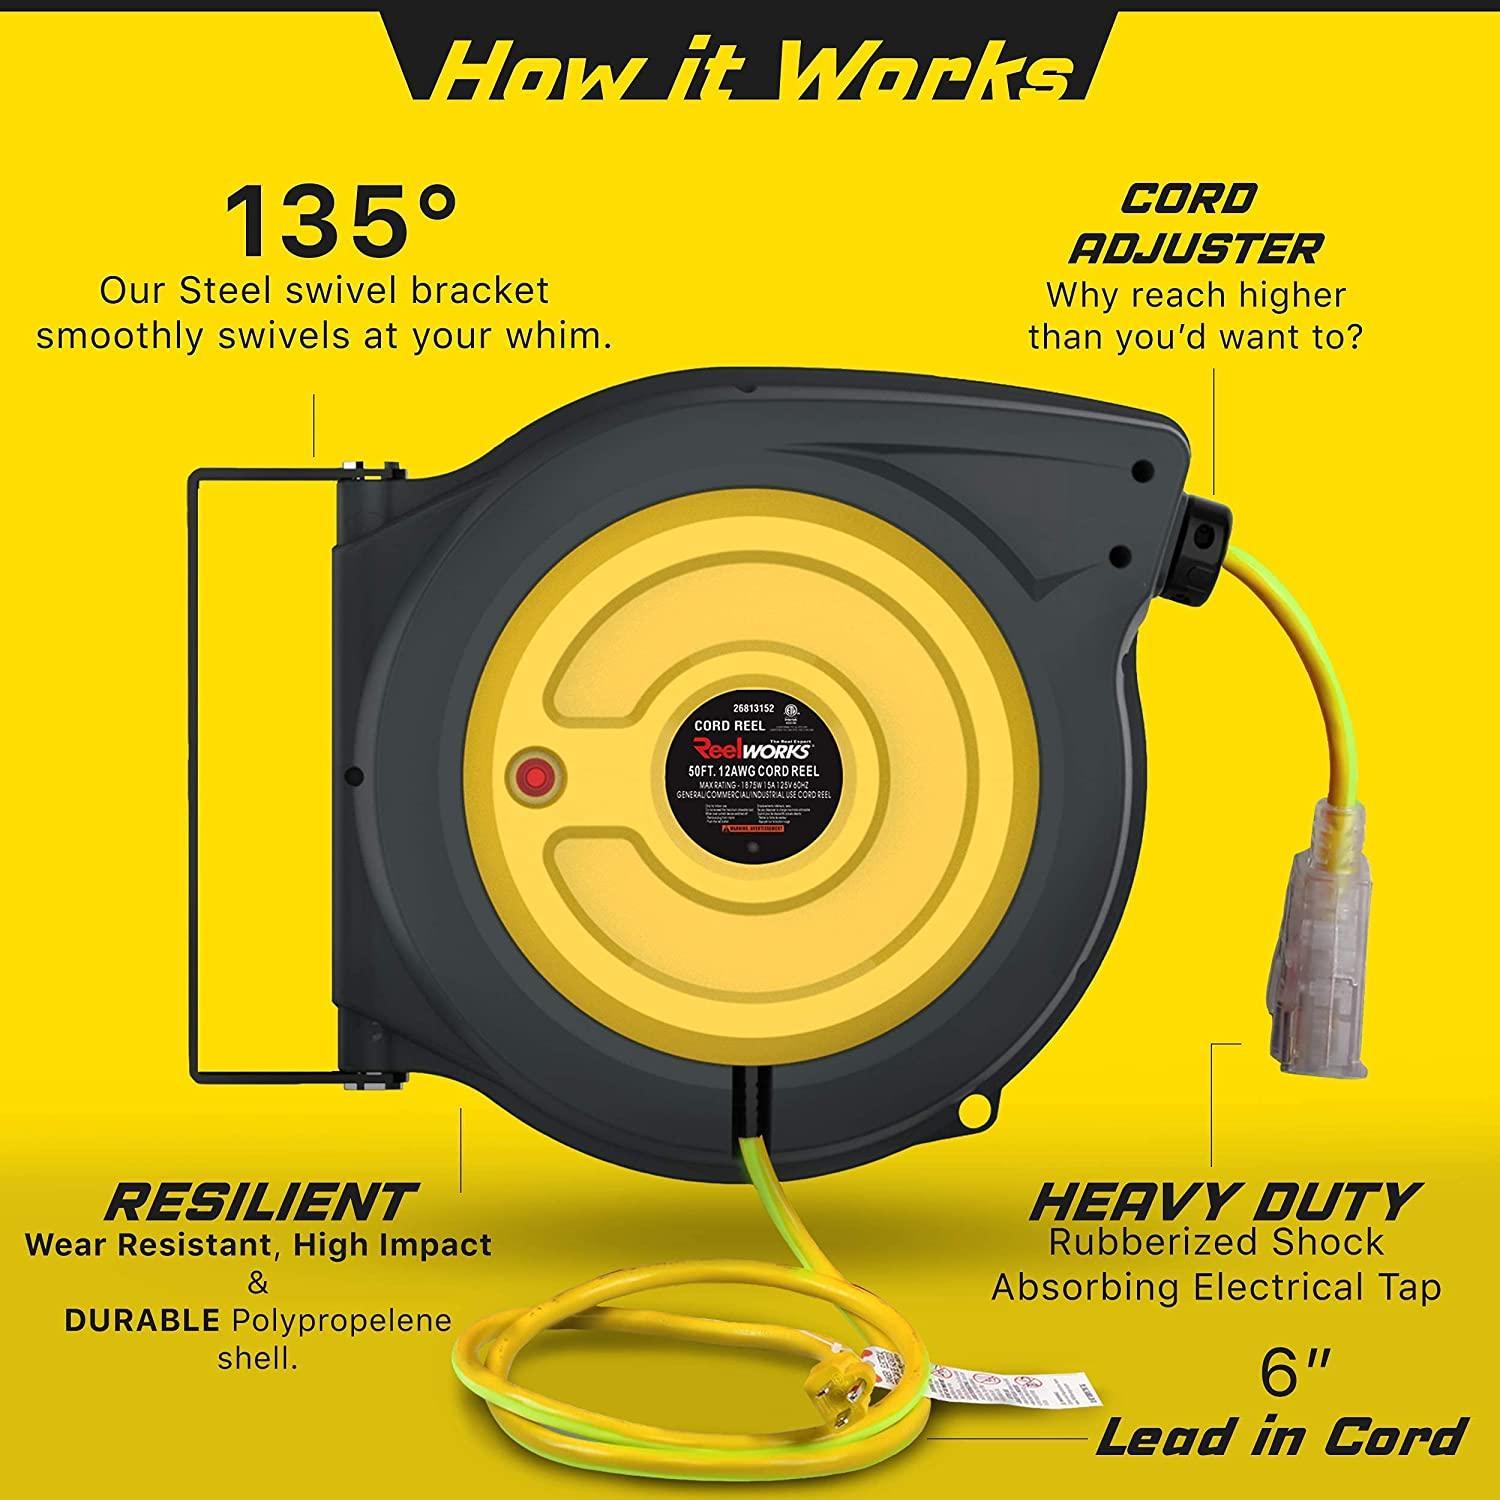 Commercial Extension Cord Reel Heavy Duty Retractable Long